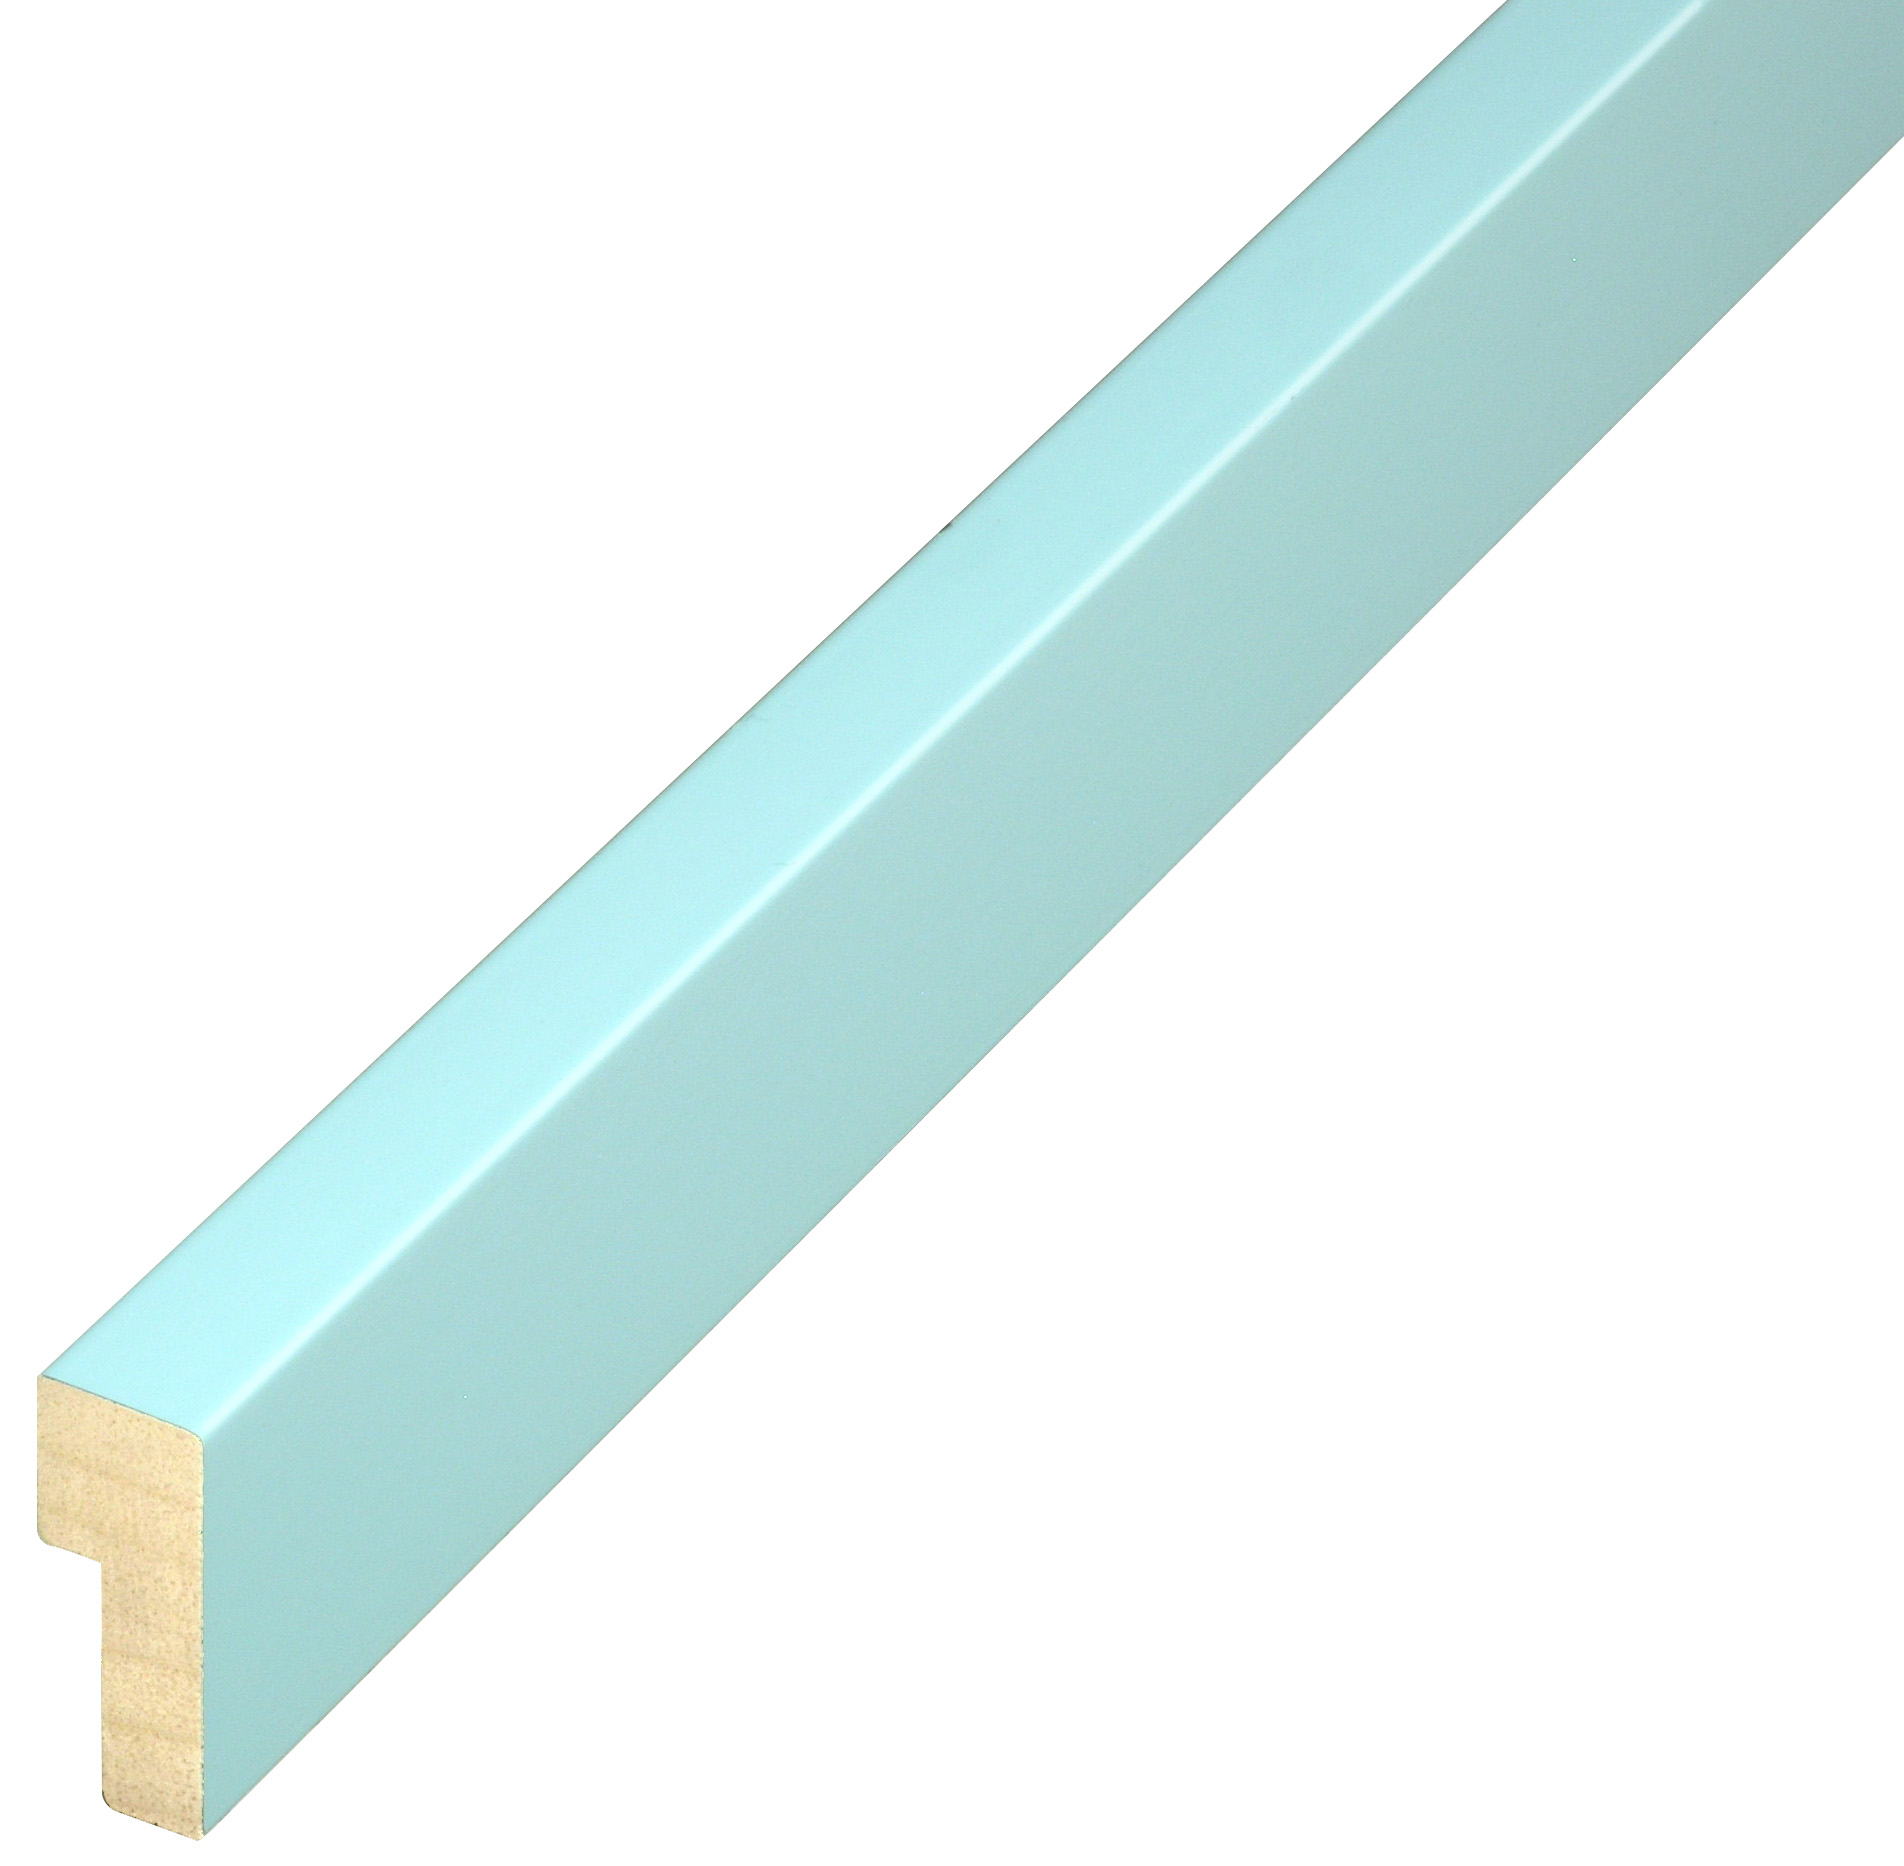 Moulding ayous - Widht 15 mm - Height 40 mm - Sky blue - 726CIELO